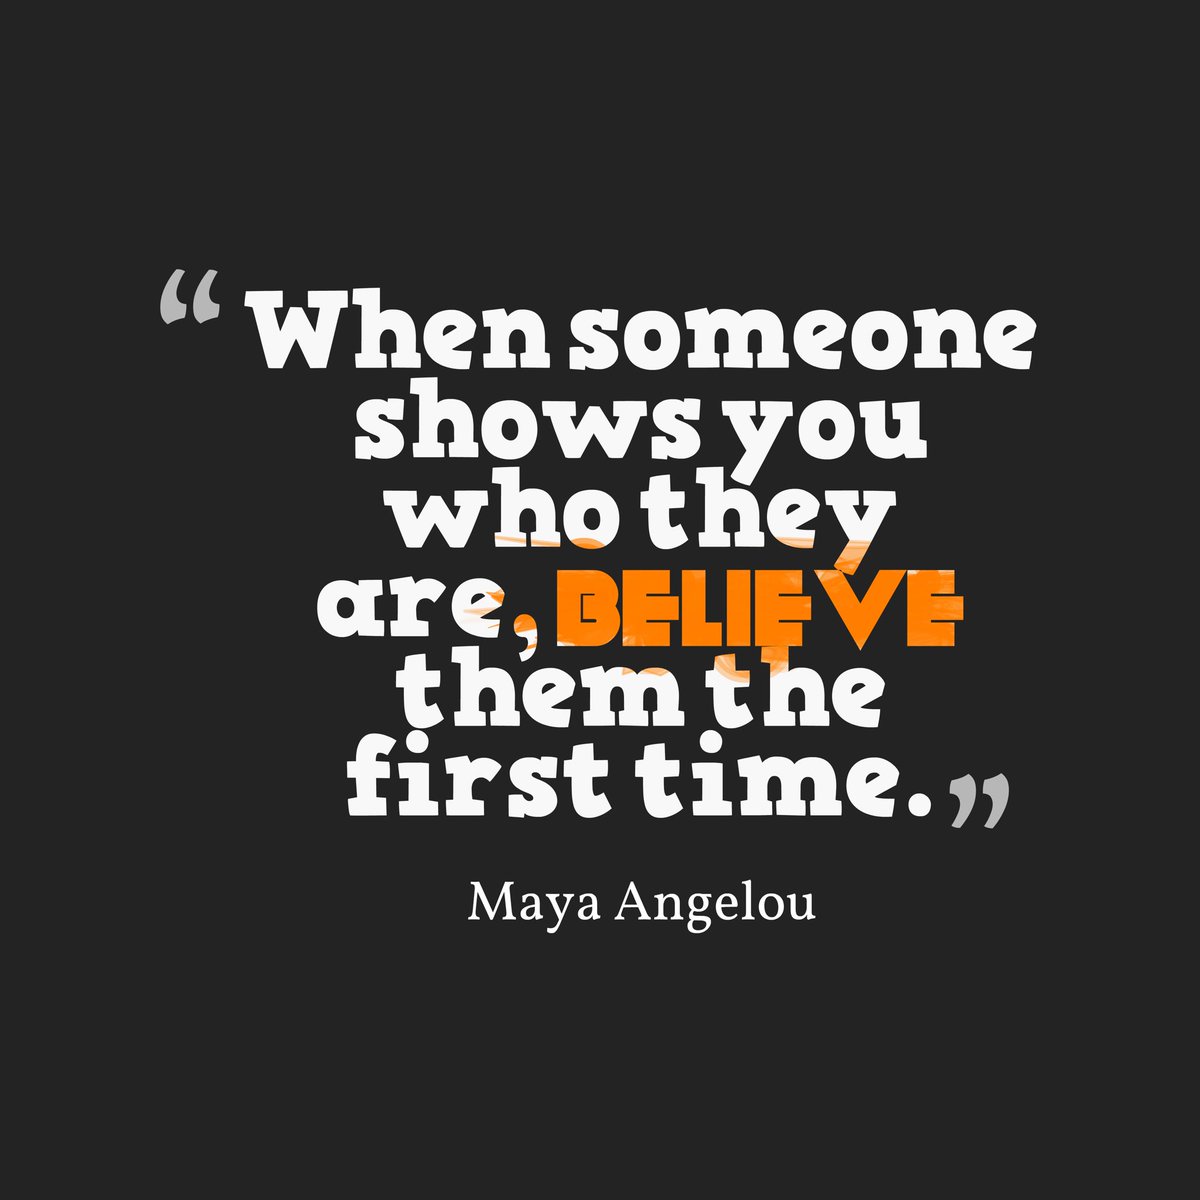 When someone shows you who they are, believe them the first time.    — Maya Angelou52/  https://twitter.com/techgirlmagic/status/1112849928500310017?s=21  https://twitter.com/berniceking/status/1089912309458370565?s=21  https://twitter.com/ifindkarma/status/1203949888225959936?s=21  https://twitter.com/byst/status/1094119984857600000?s=21